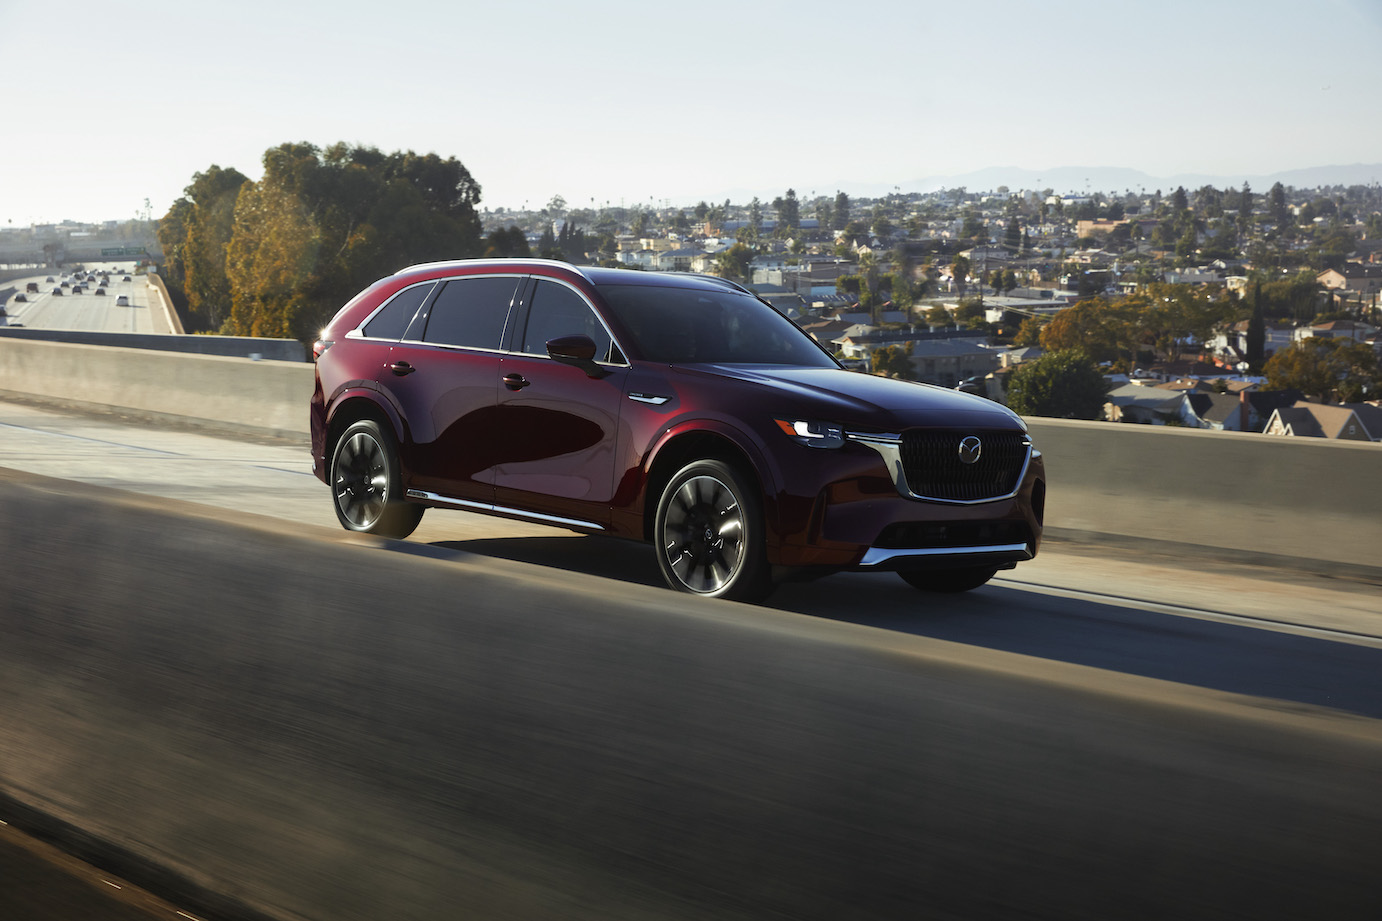 The new 2024 Mazda CX-90 – pictured here in burgundy driving on the road – is one of the new additions to Mazda sales figures.